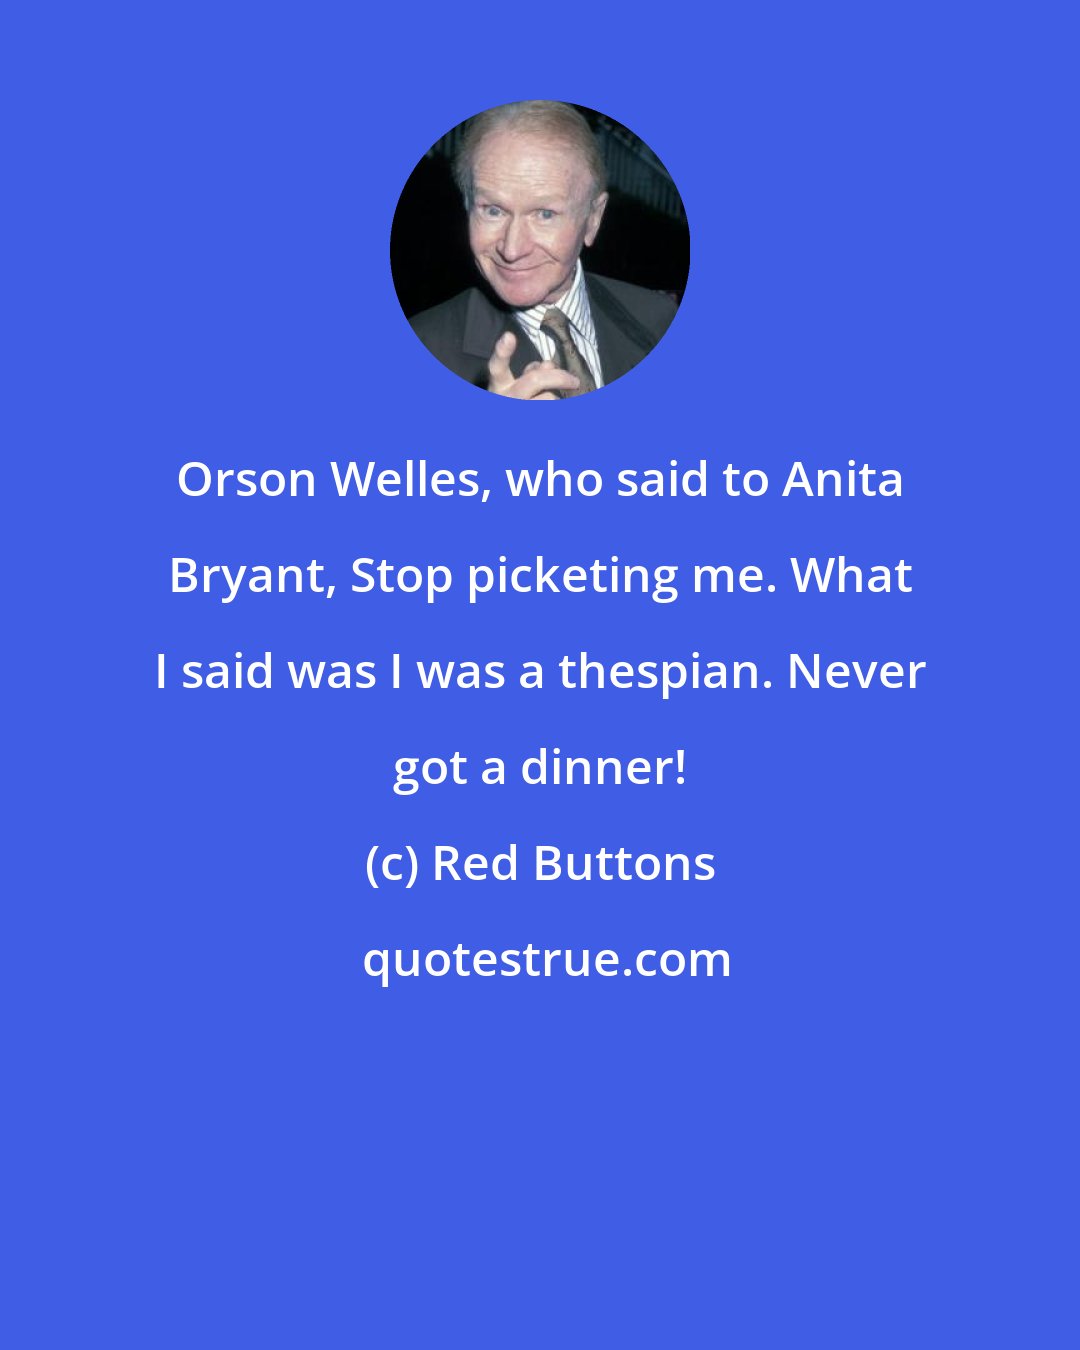 Red Buttons: Orson Welles, who said to Anita Bryant, Stop picketing me. What I said was I was a thespian. Never got a dinner!